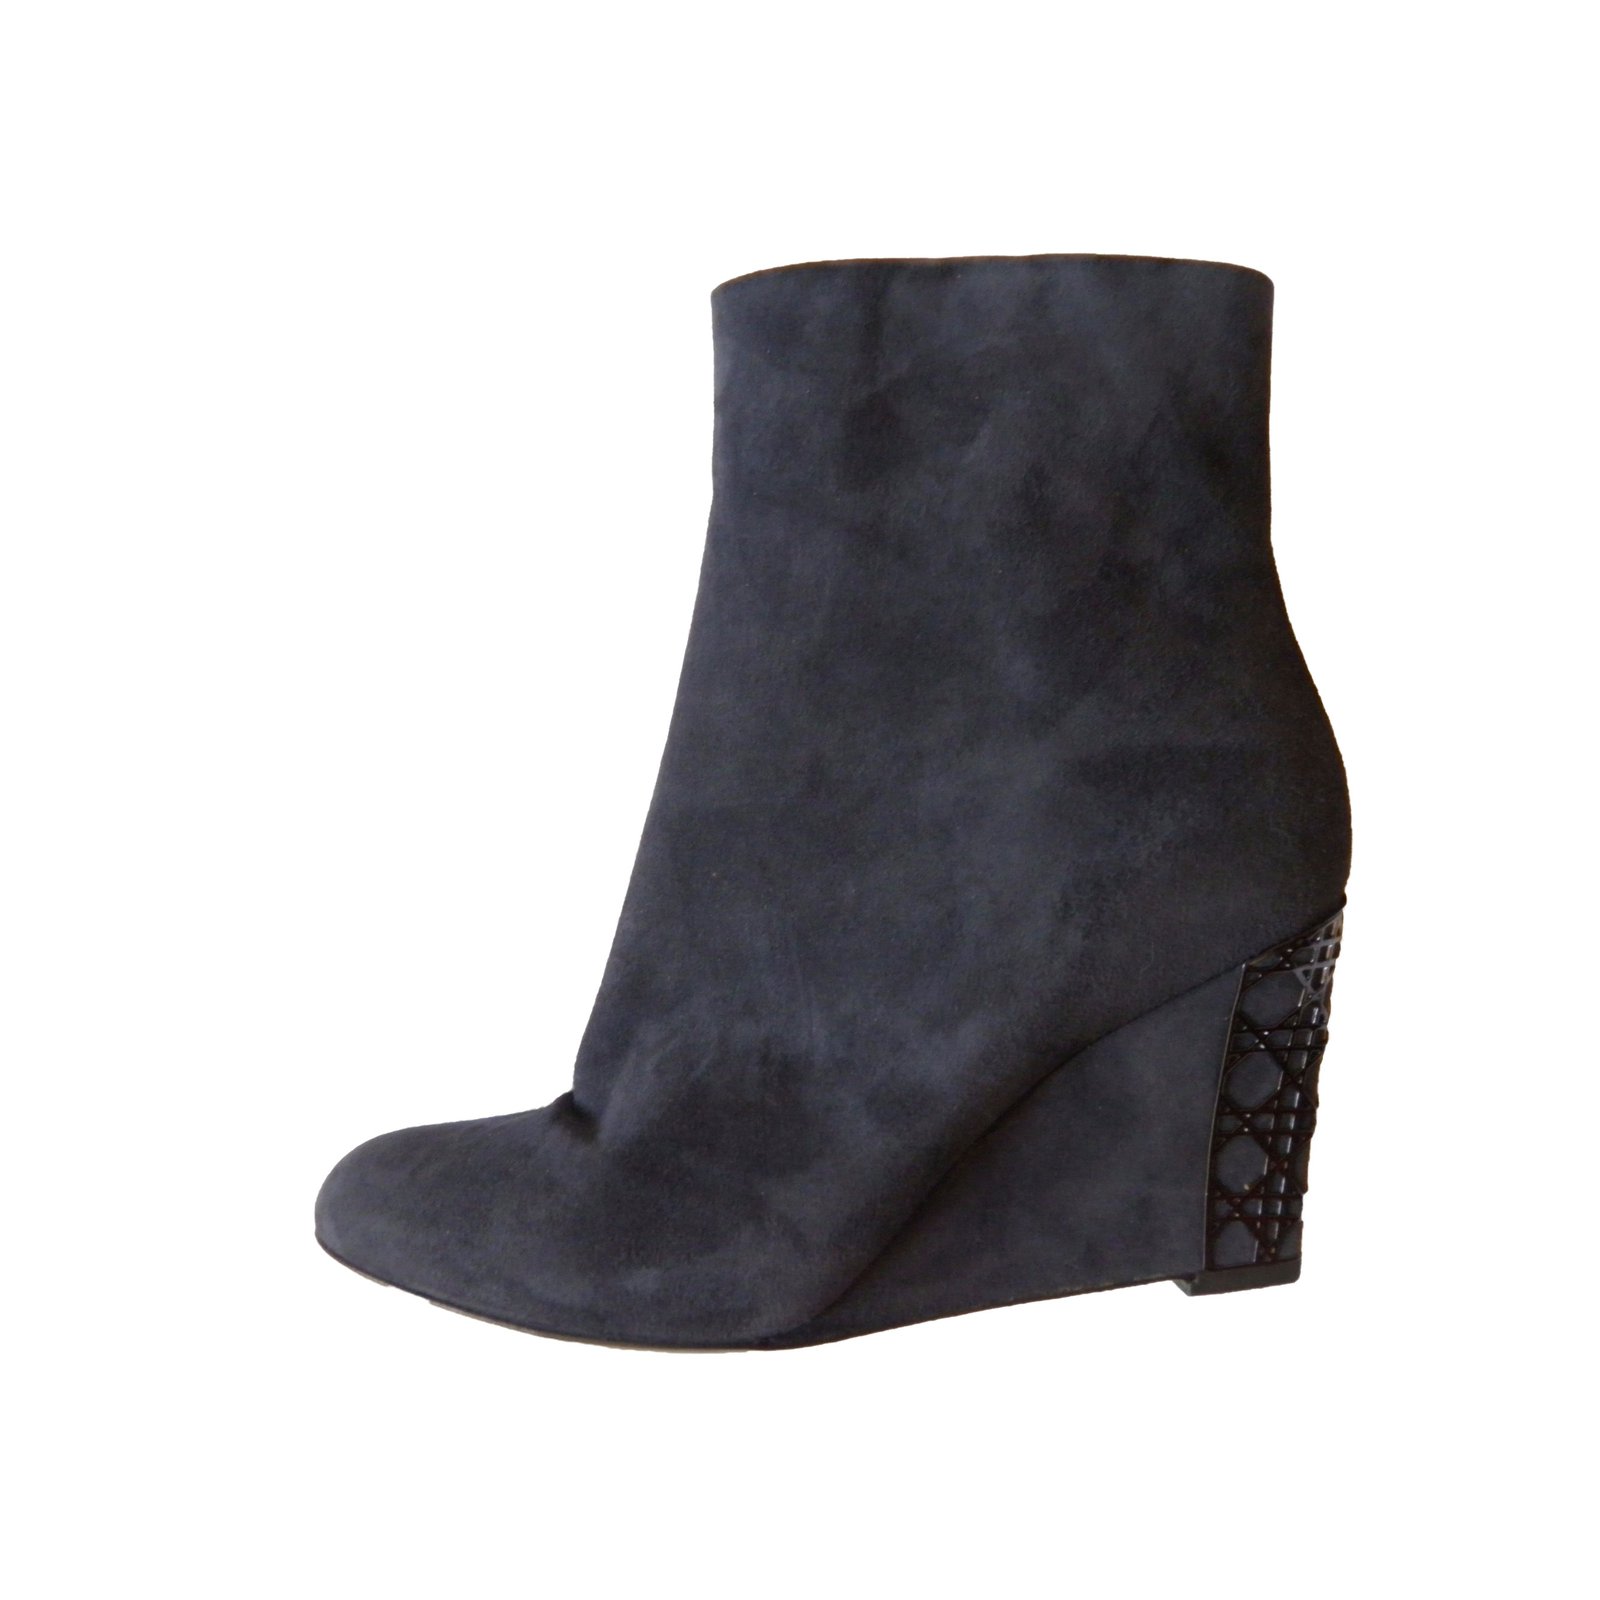 blue wedge ankle boots